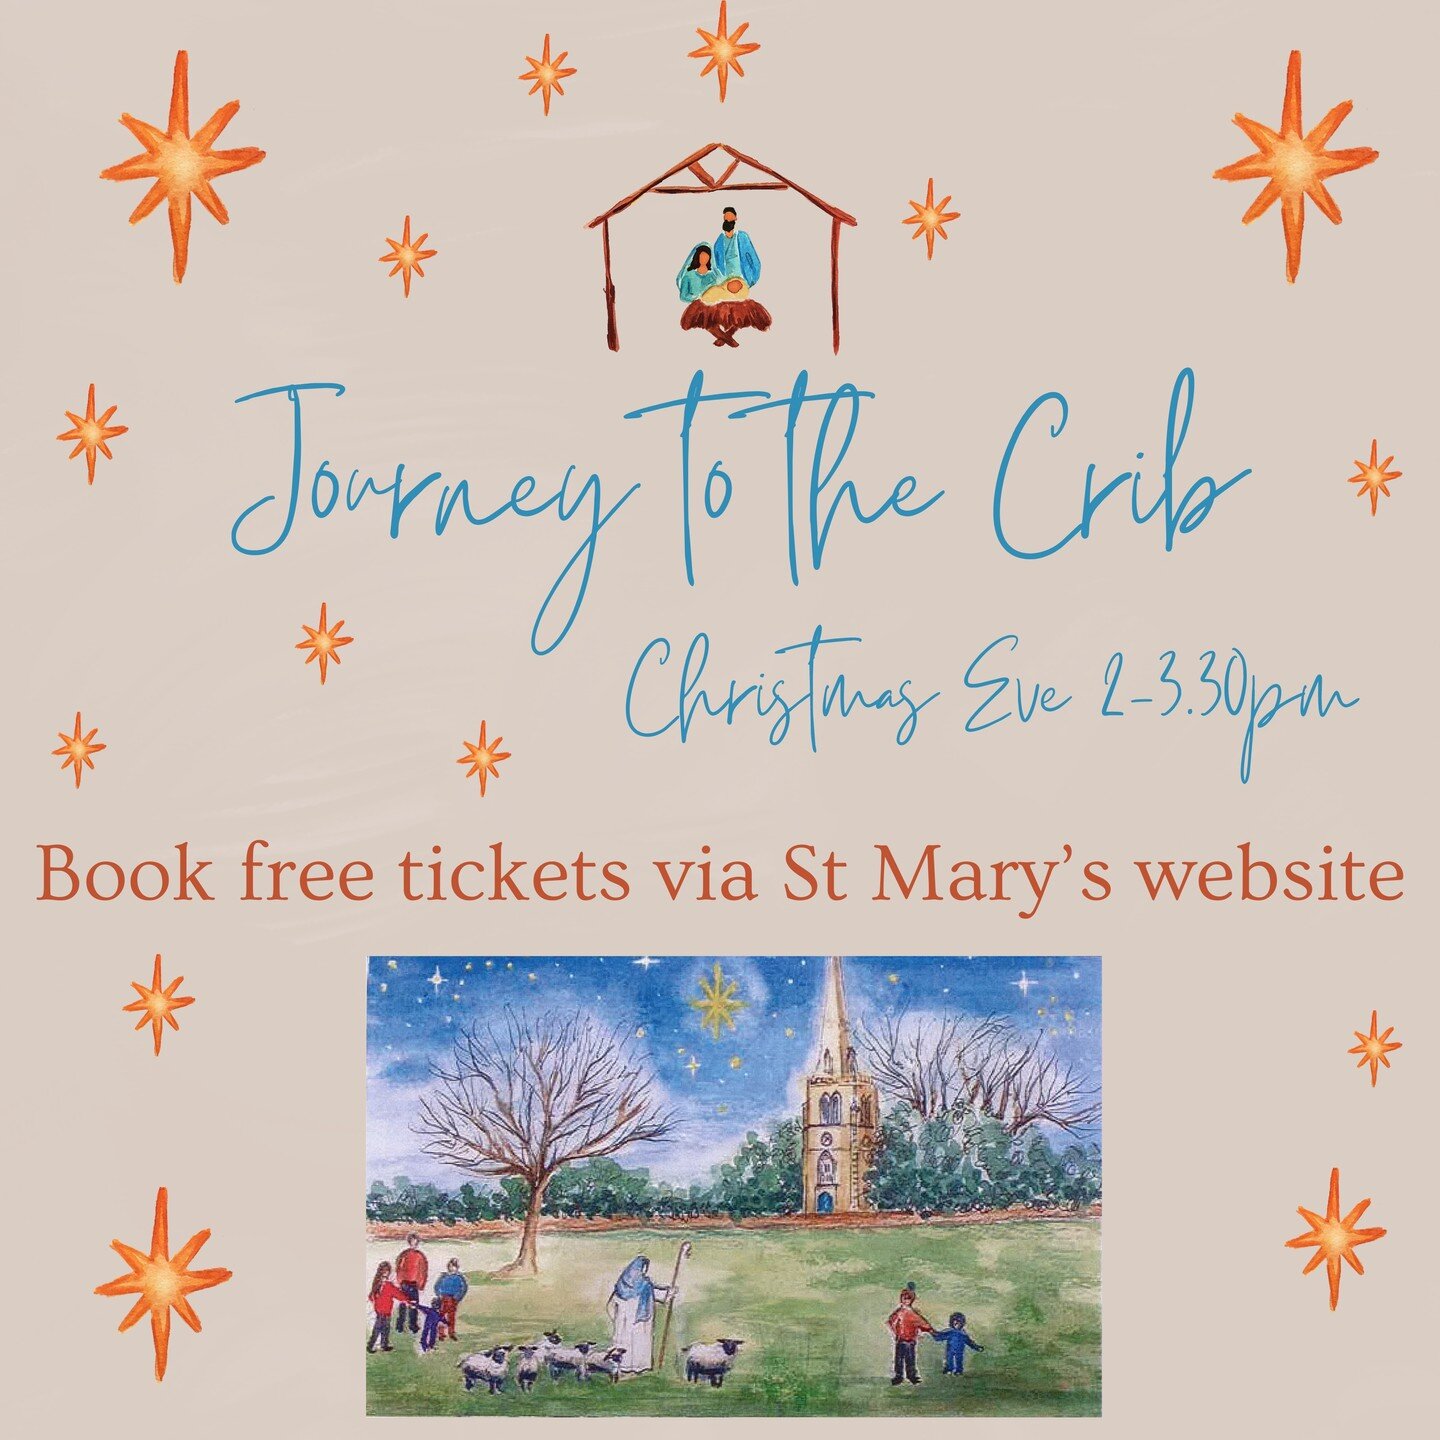 Journey to the Crib bookings now open, tickets are free but you do need a timed ticket for entry #christmaseve #wimbledon #wimbledonvillage #christmas #journeytothecrib see website www.stmaryswimbledon.org